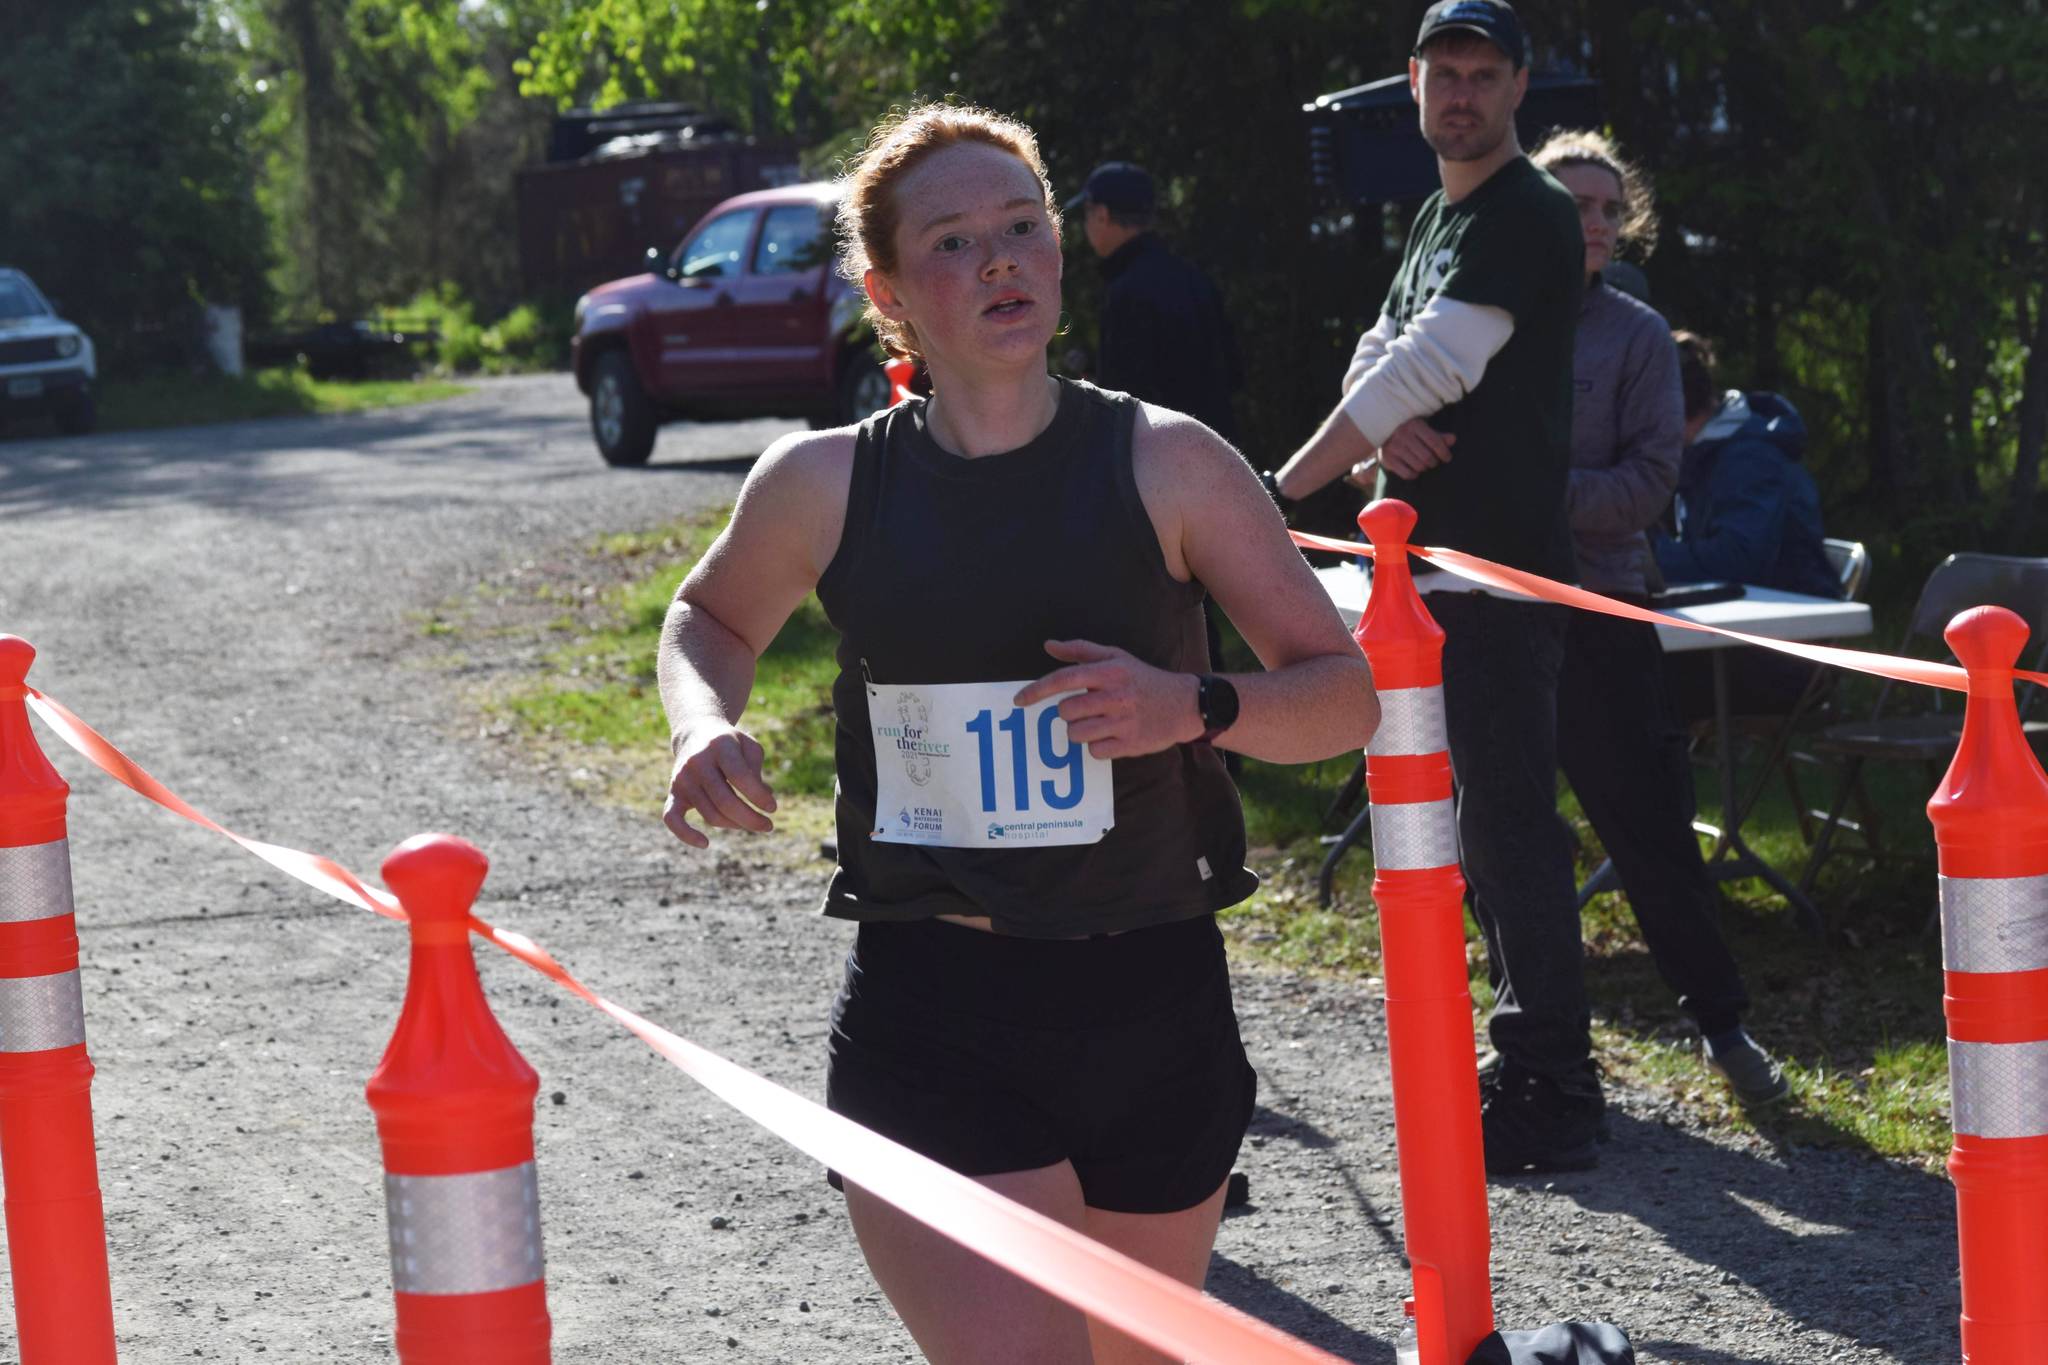 Aubrey Curl finishes first in the women’s 5K race at the Kenai Watershed Forum’s Run for the River in Soldotna Creek Park on Saturday, June 12, 2021. (Camille Botello/Peninsula Clarion)